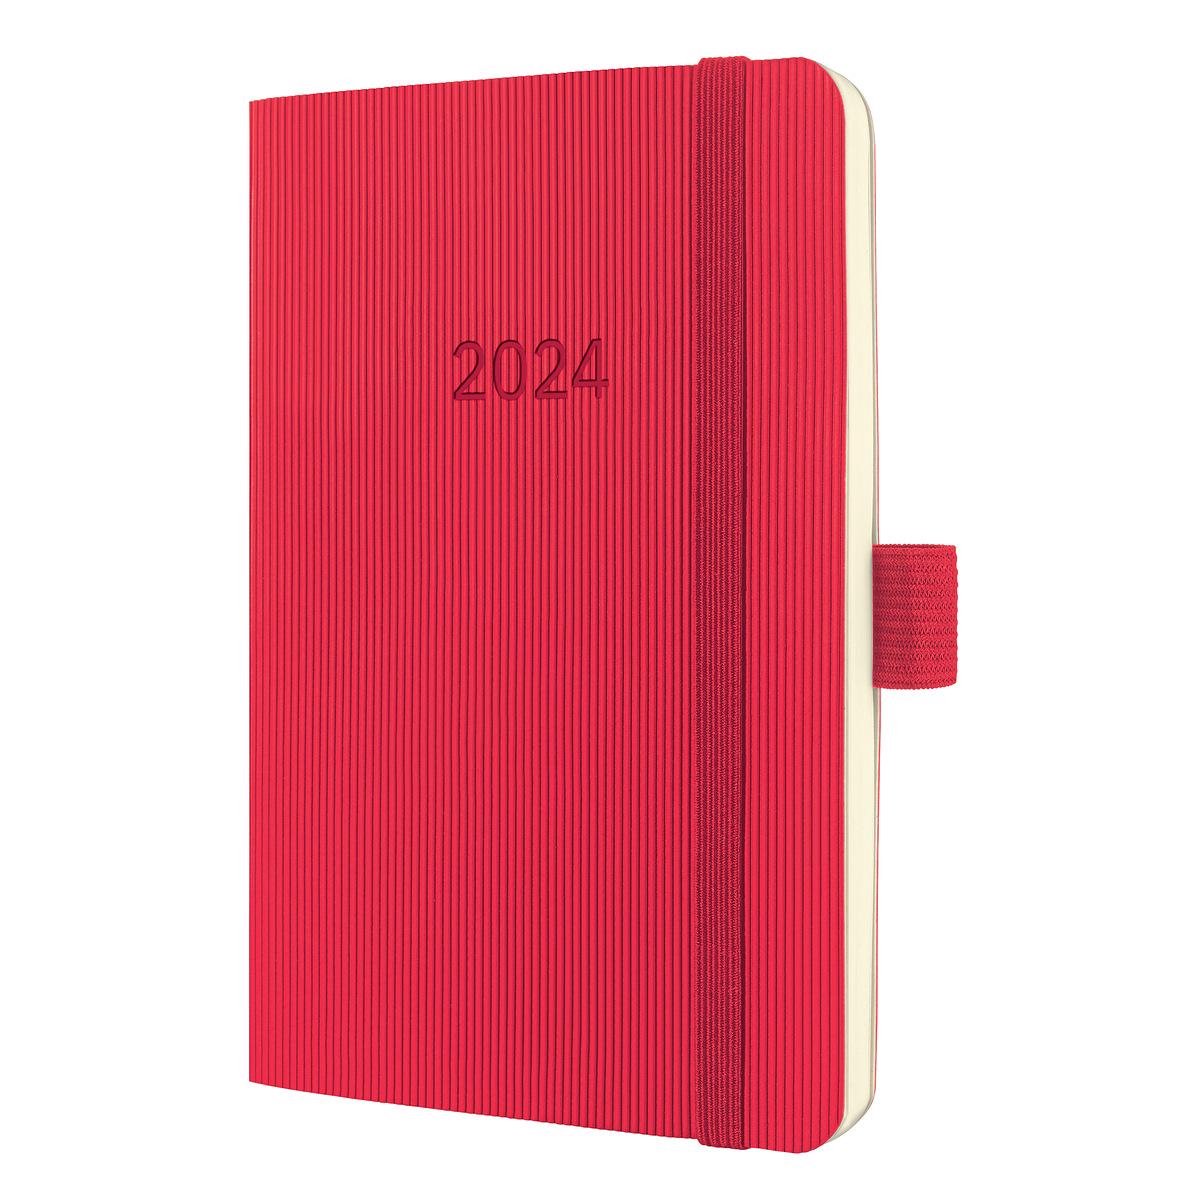 Sigel agenda 2024 - Conceptum - A6 - softcover - 2 pagina's / 1 week - rood - SI-C2435